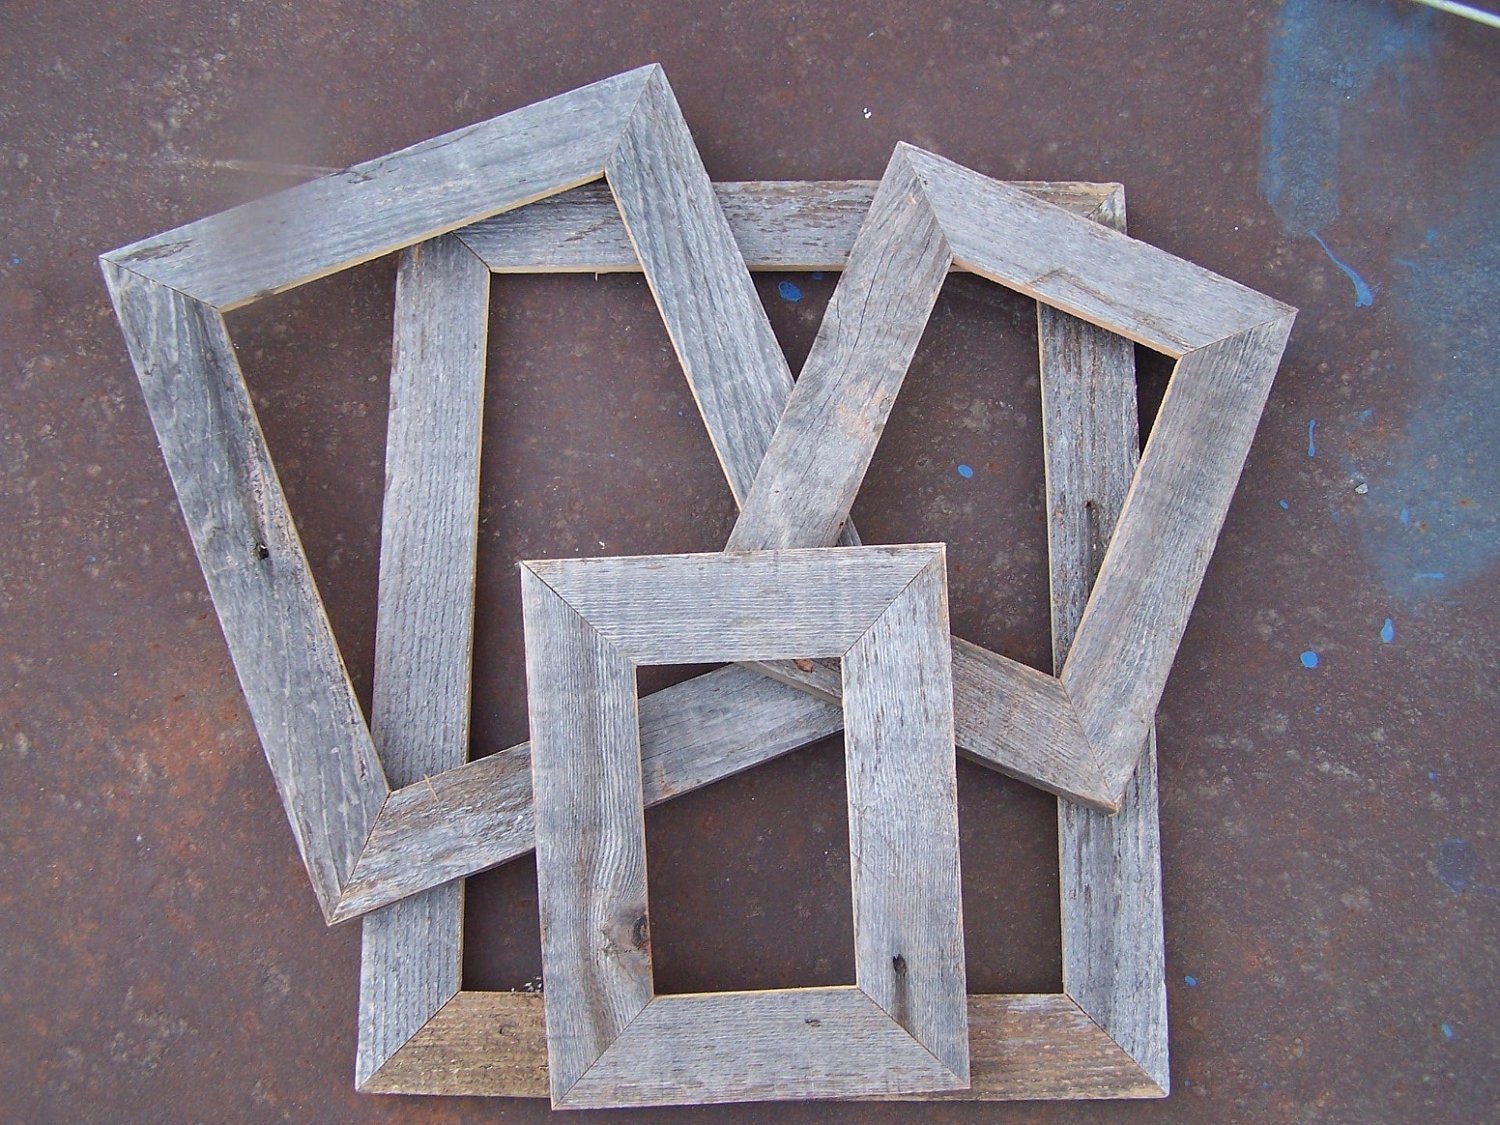 Lot of 4 Flat Barnwood Picture Frames. 1 Each 4x6, 5x7, 8x10 & 11x14. Rustic....Weathered.